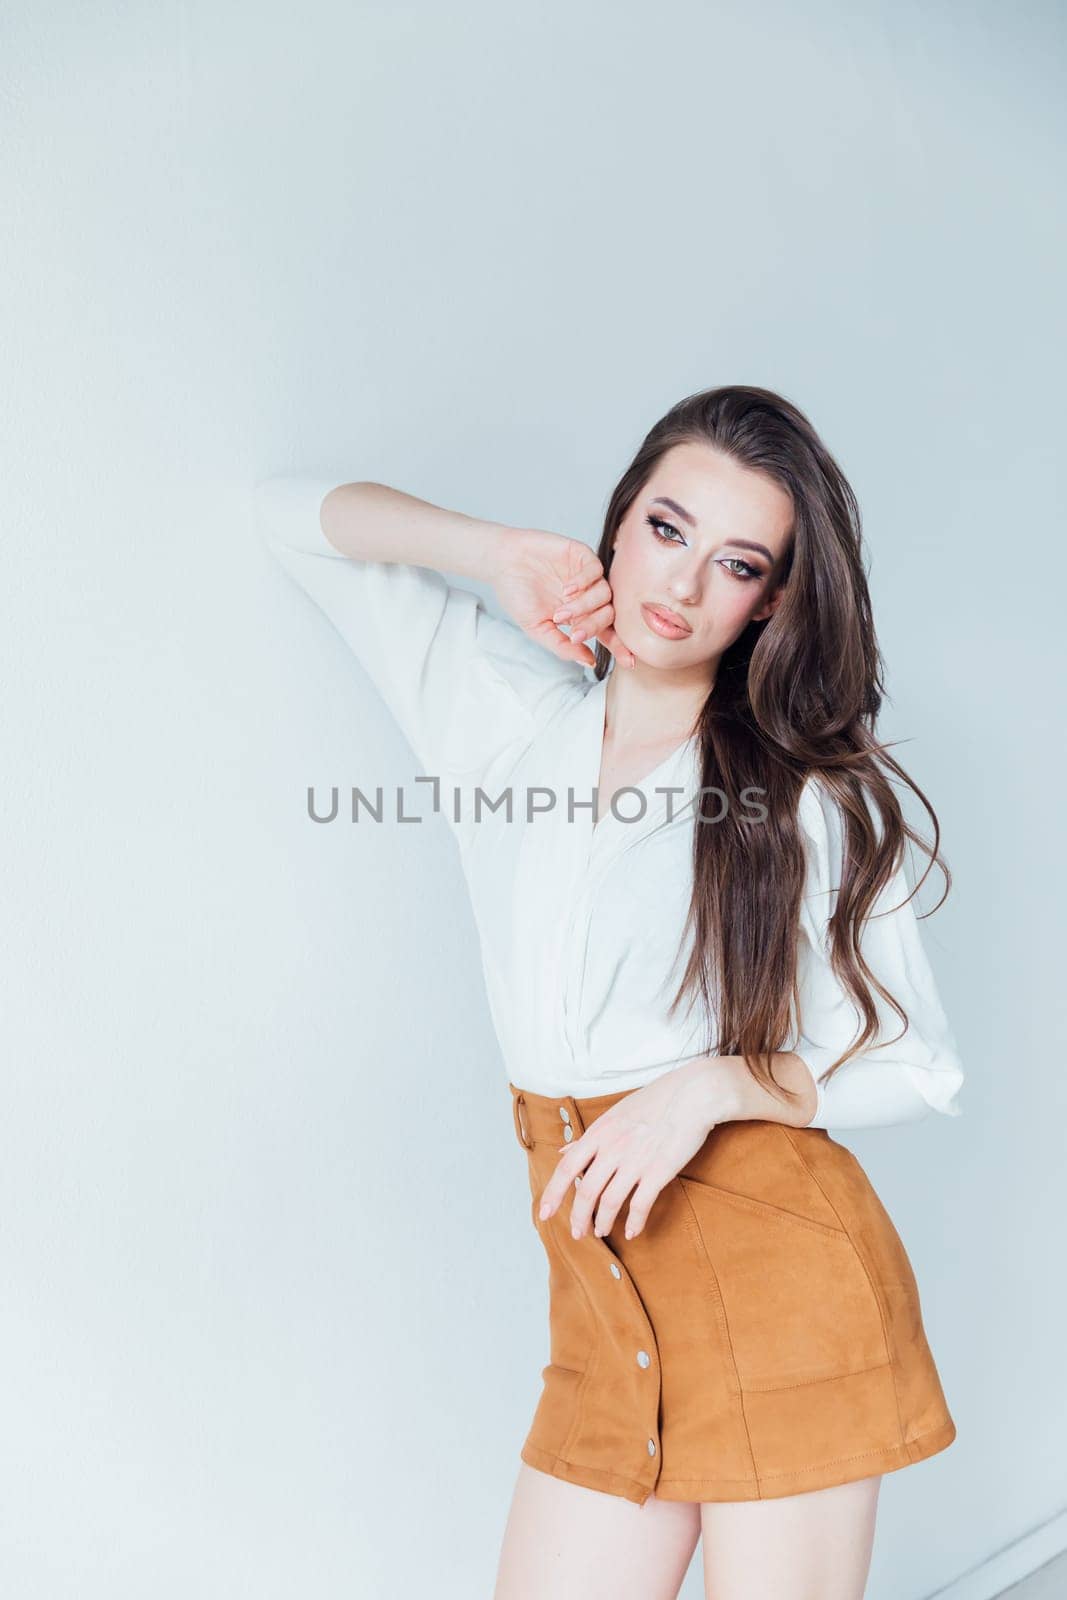 Beautiful fashionable woman in blouse and yellow skirt on white background